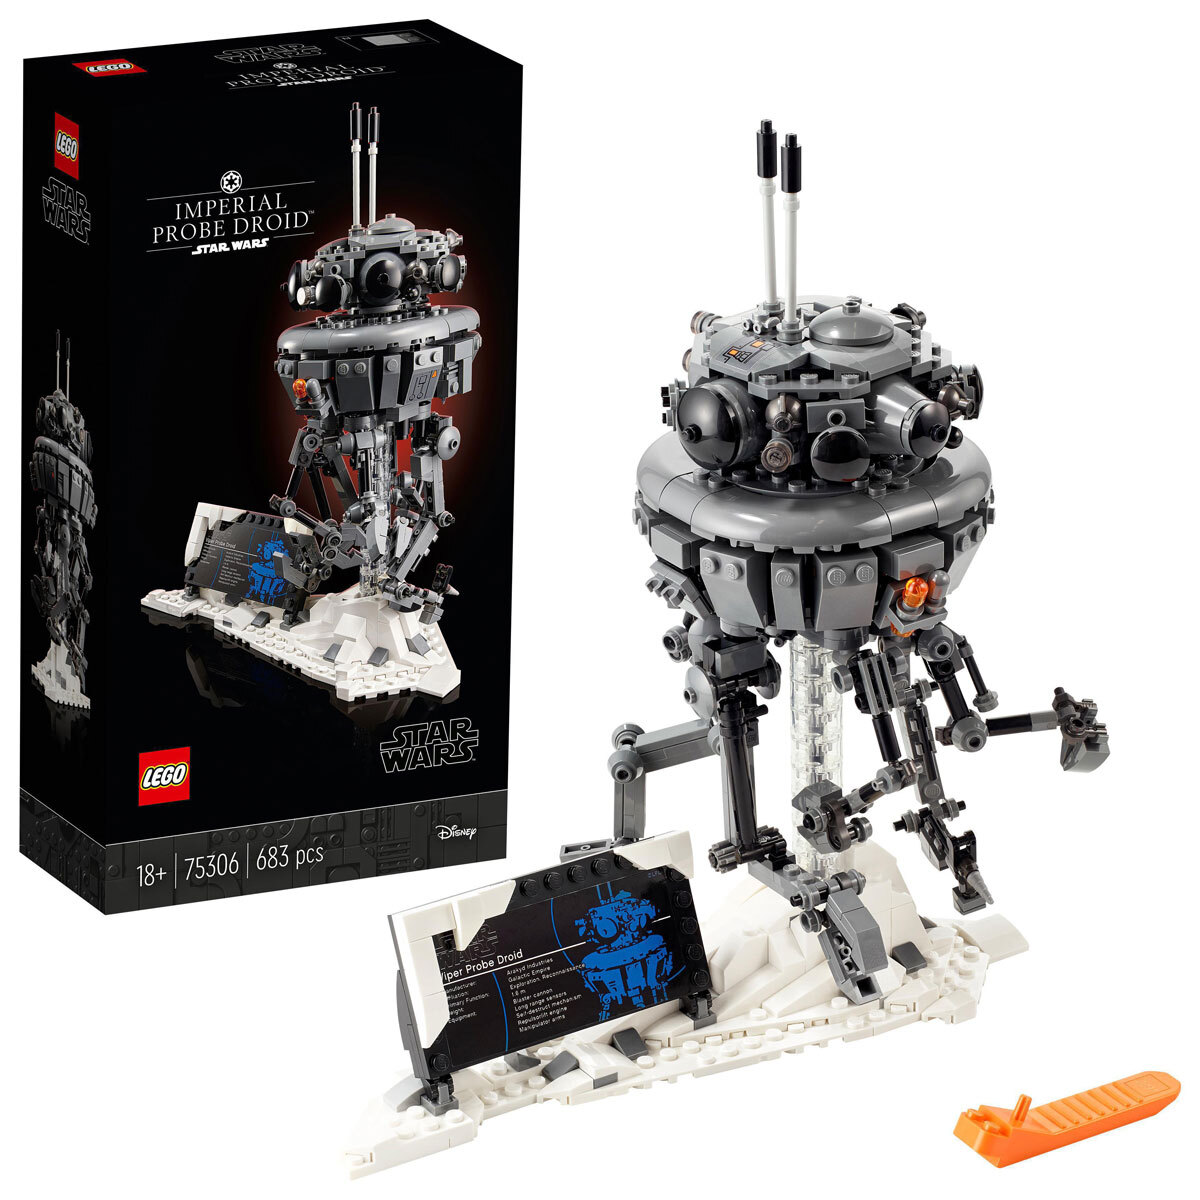 Buy LEGO Imperial Probe Droid Model 75306 Box & Item Image at Costco.co.uk